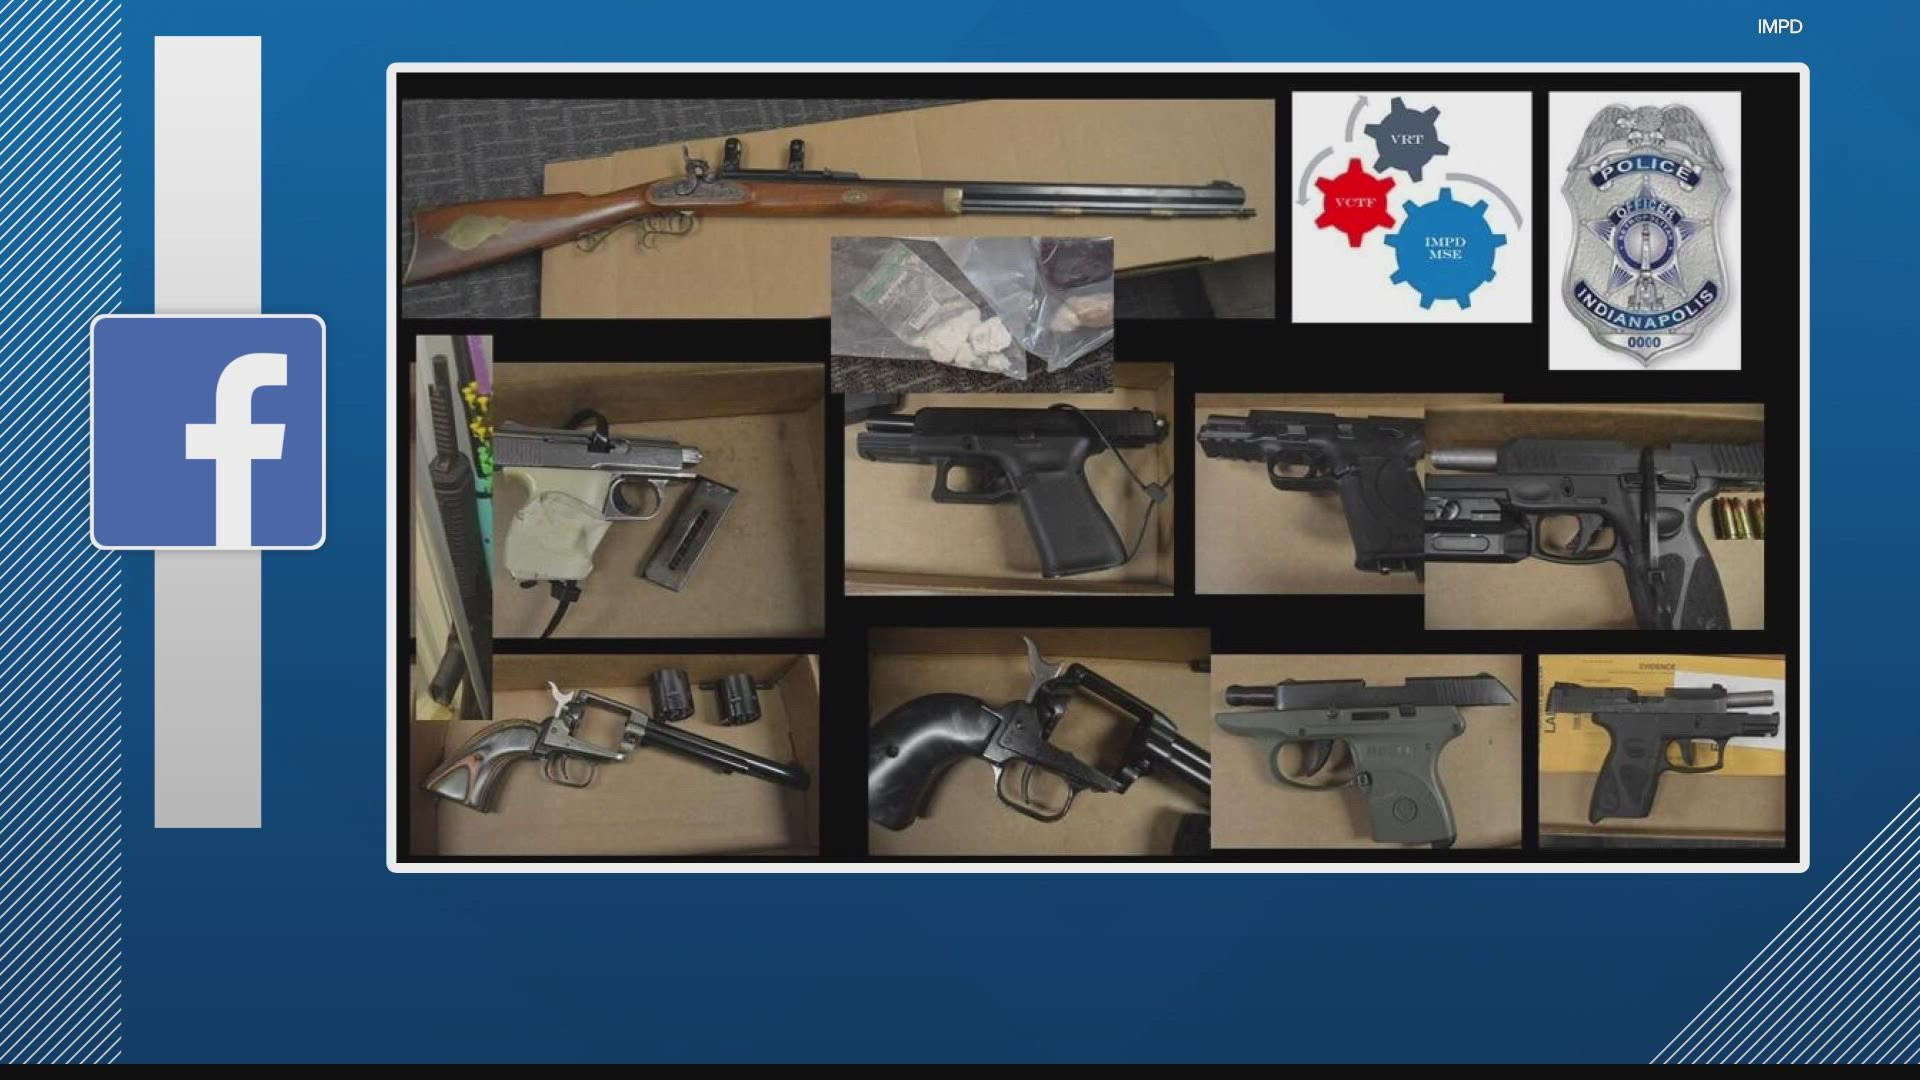 Detectives found a sizable amount of cocaine, heroin/fentanyl, and meth as well as a variety of guns at a home on the south side of Indianapolis.